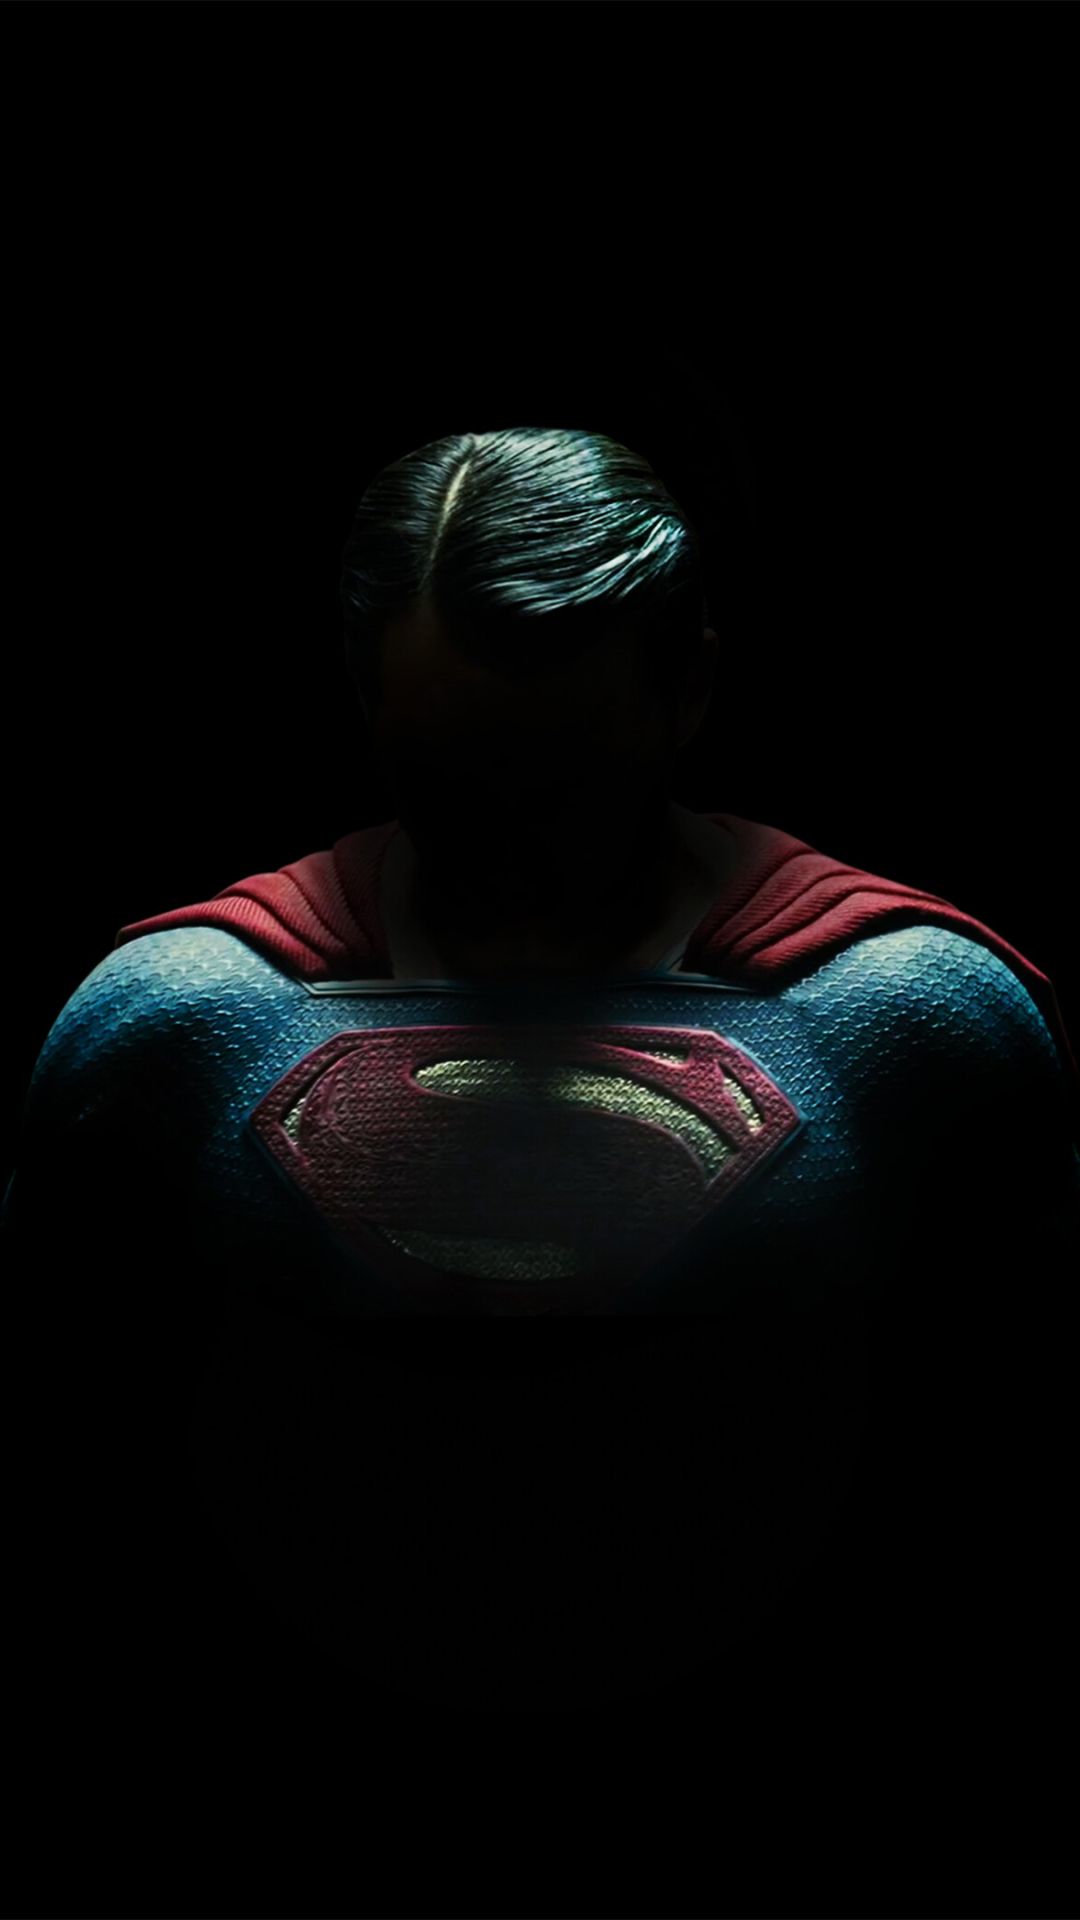 Superman Amoled iPhone 6s, 6 Plus and Pixel XL , One